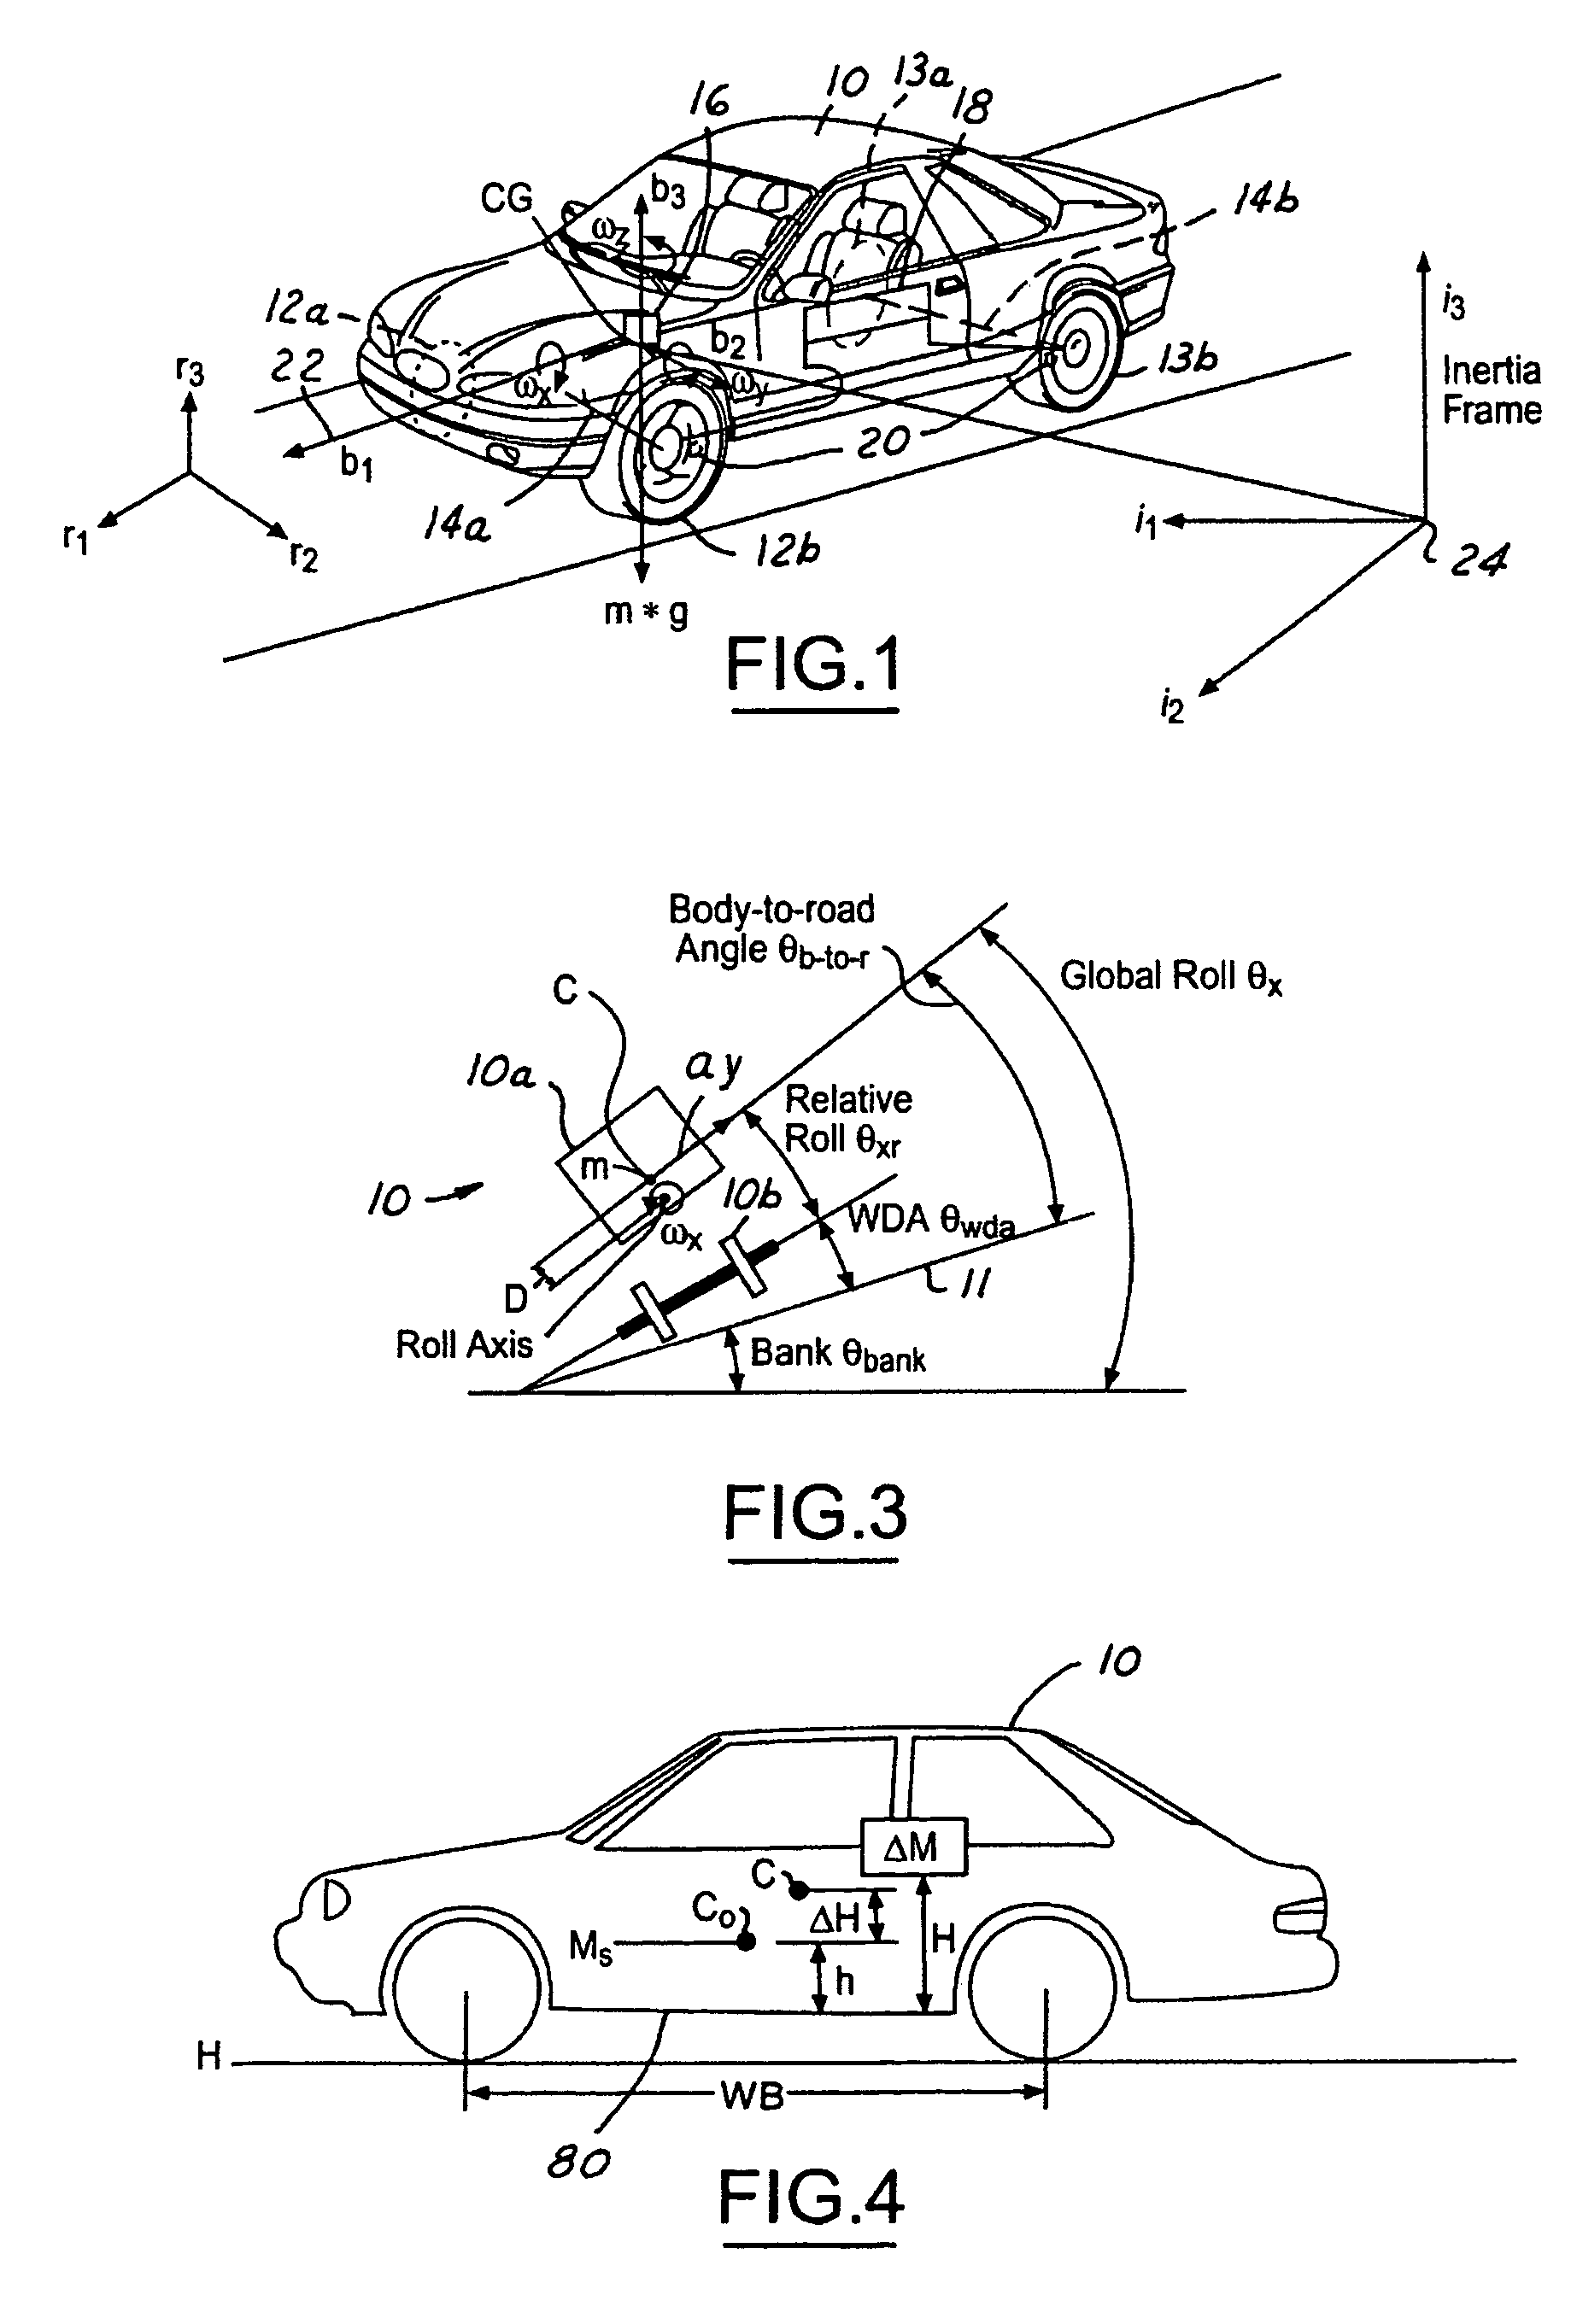 System and method for dynamically determining vehicle loading and vertical loading distance for use in a vehicle dynamic control system